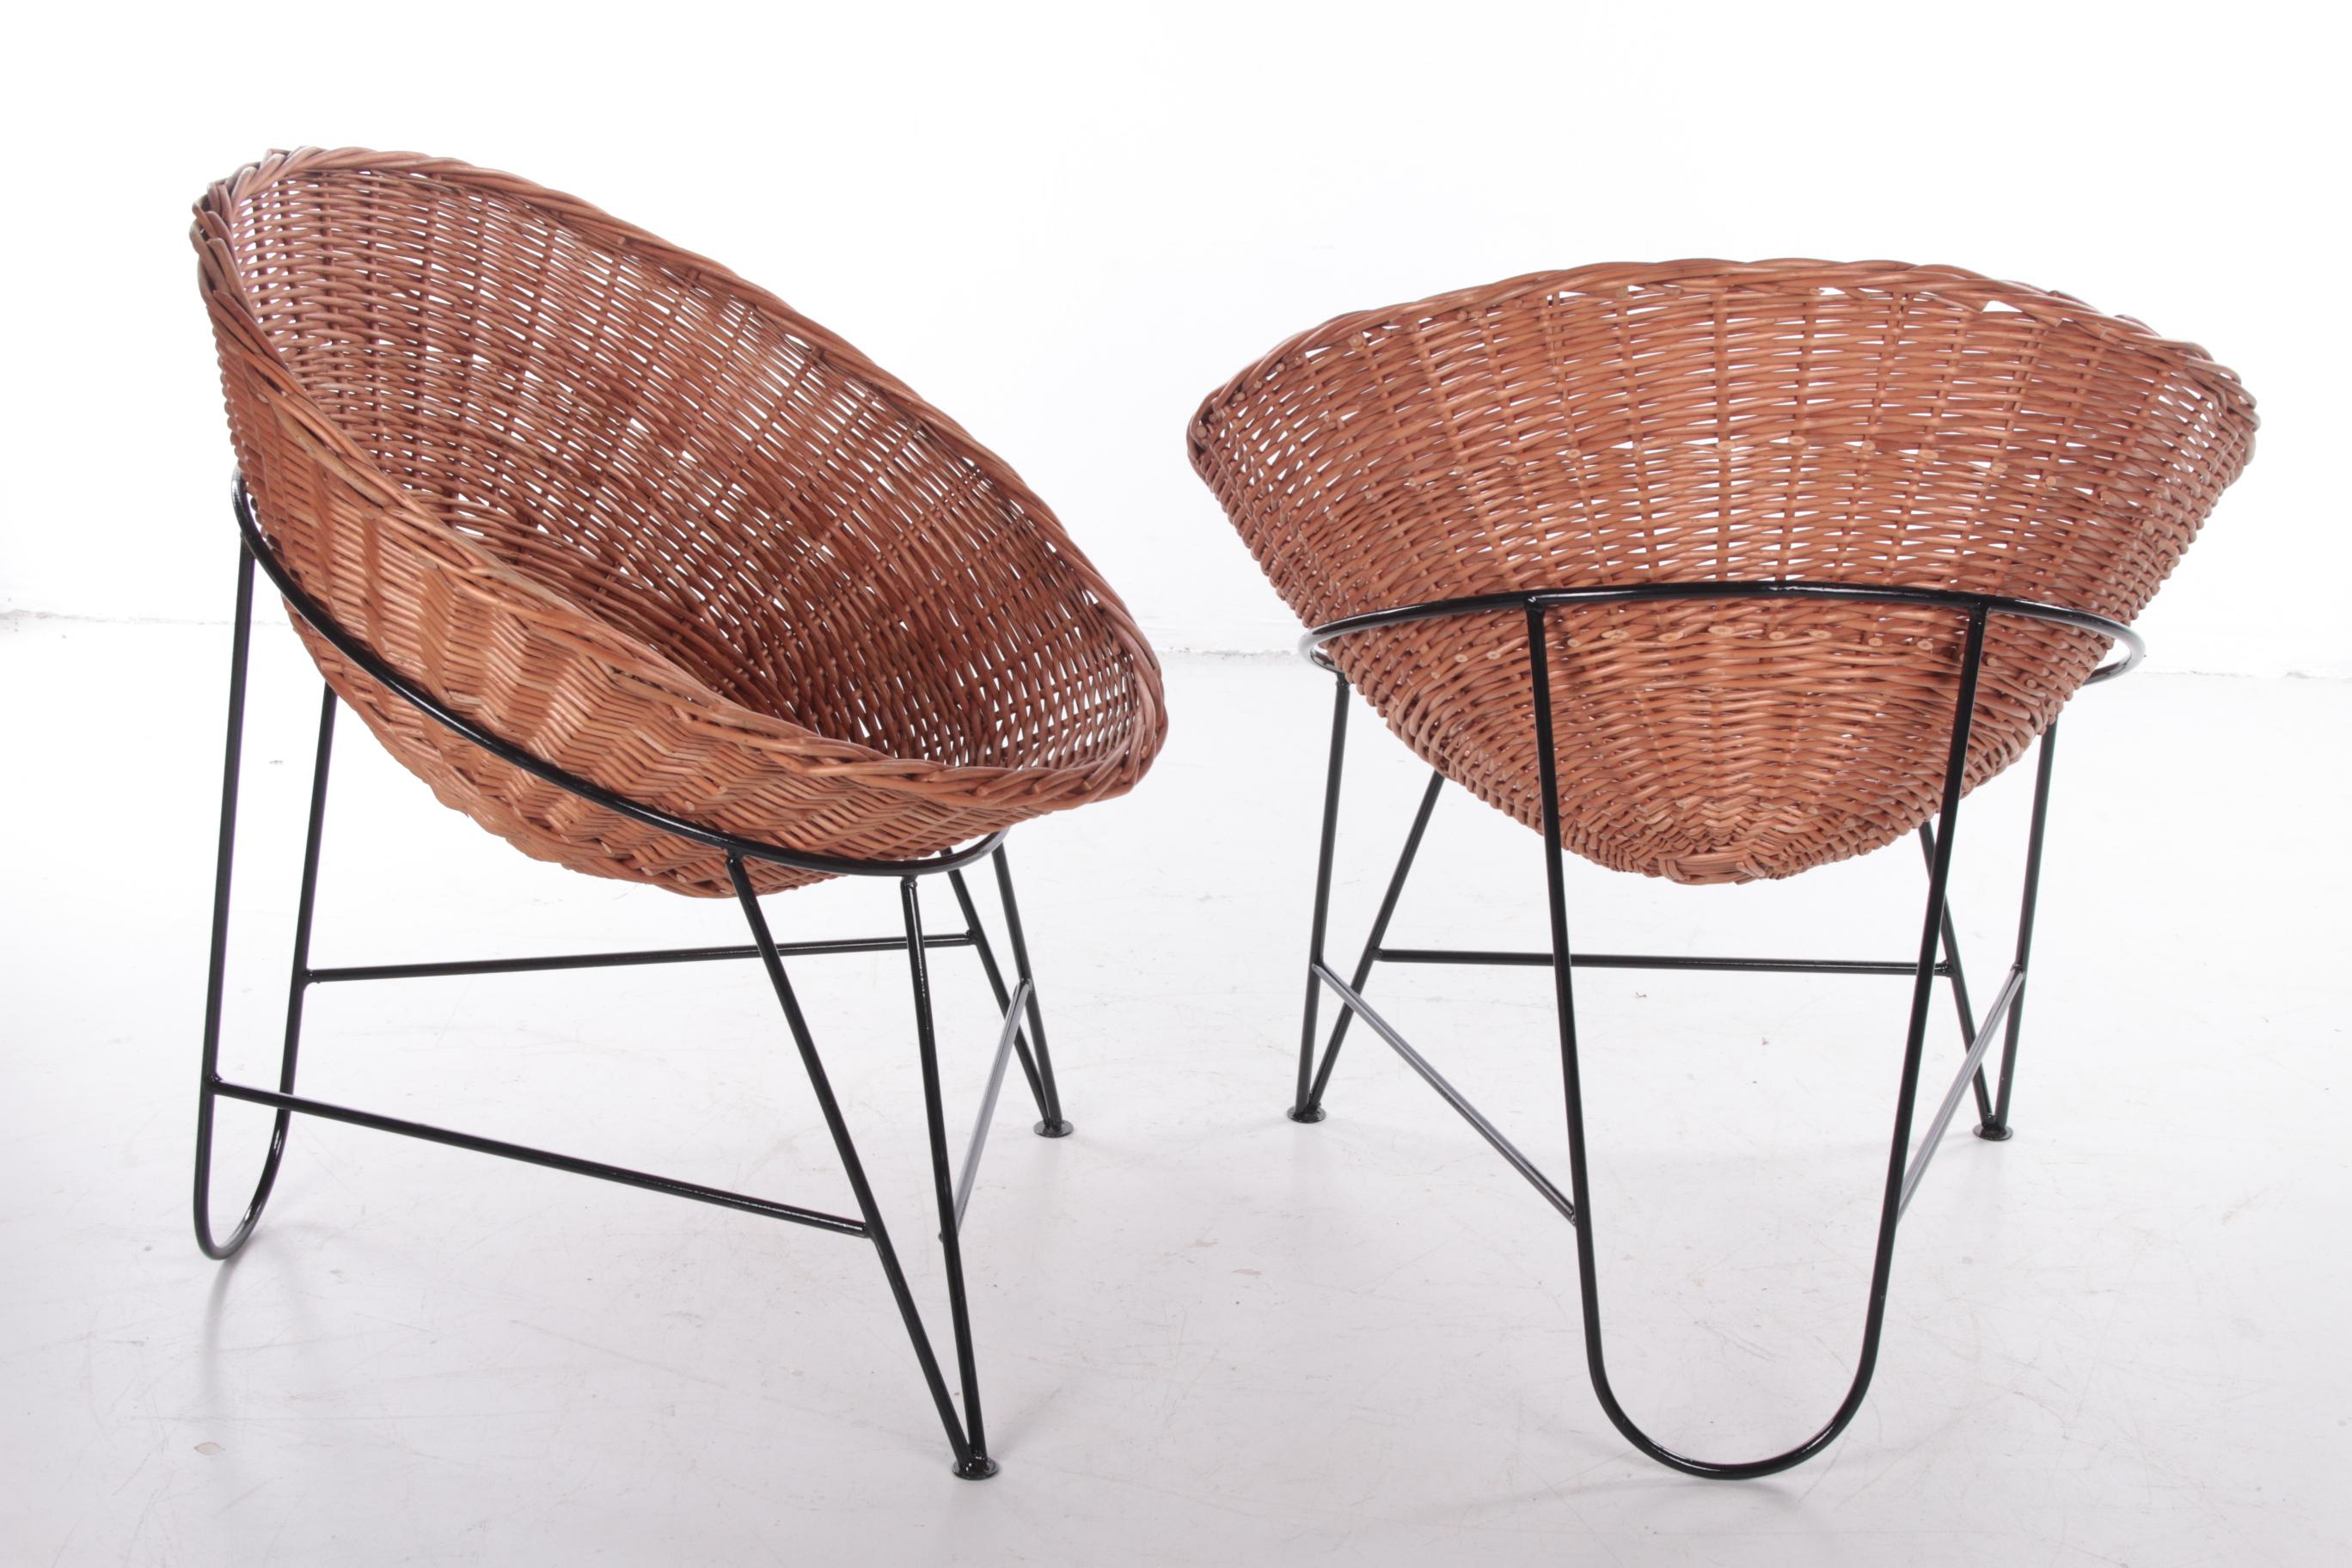 French Set of 2 Wicker chairs  of Mathieu Matégot, France, 1950